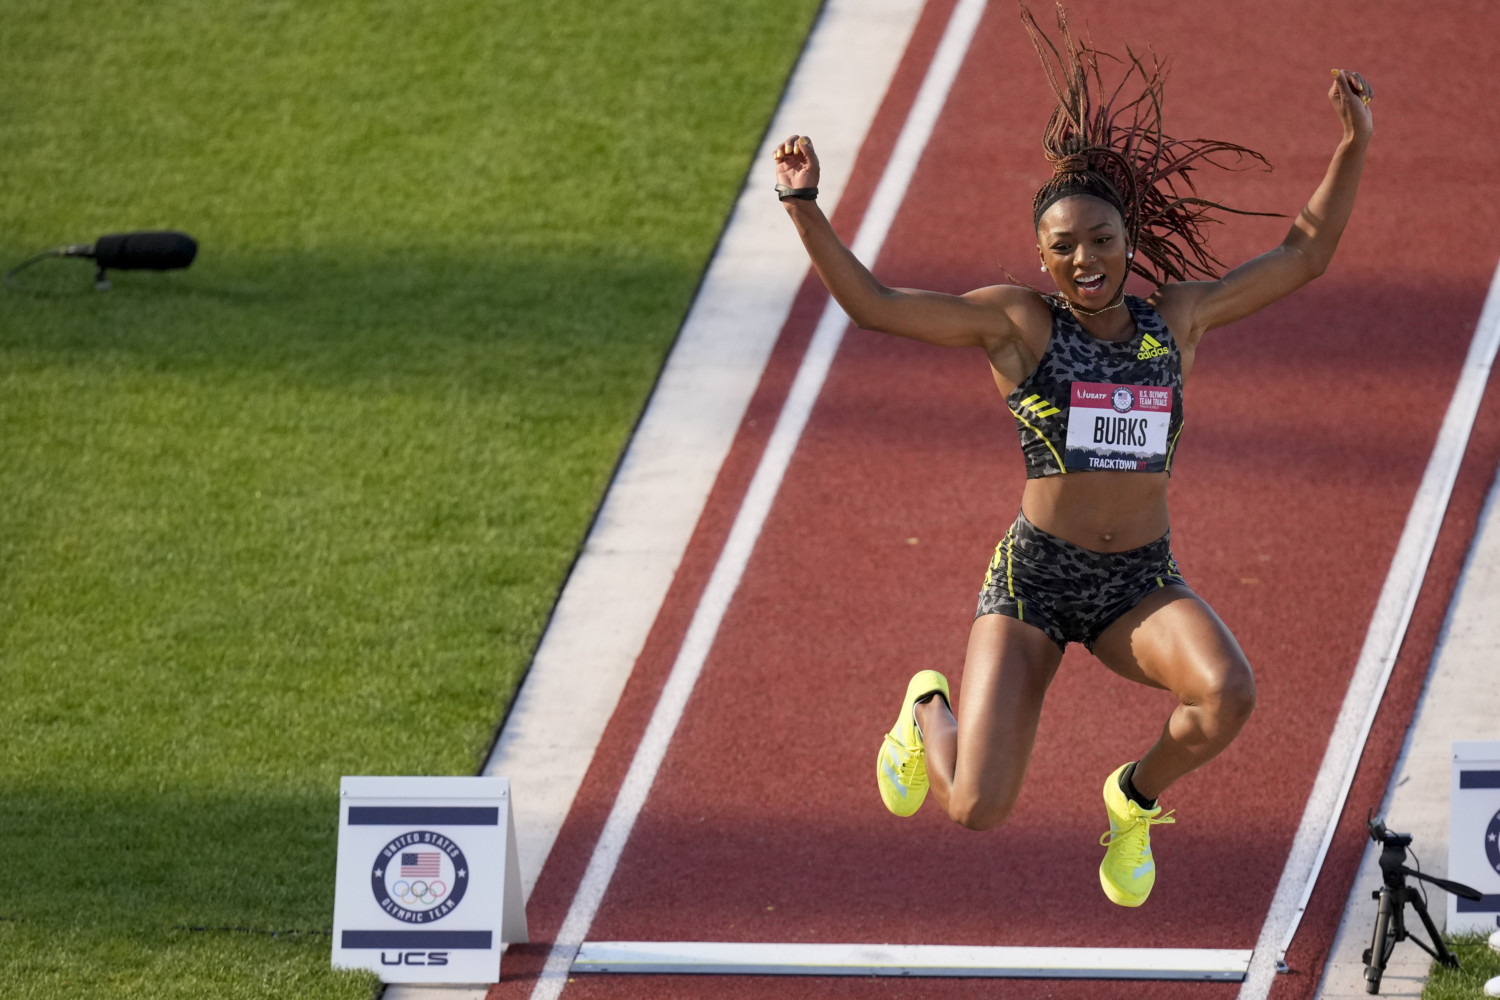 Quanesha Burks competes in long jump at U.S. Olympic Trials.